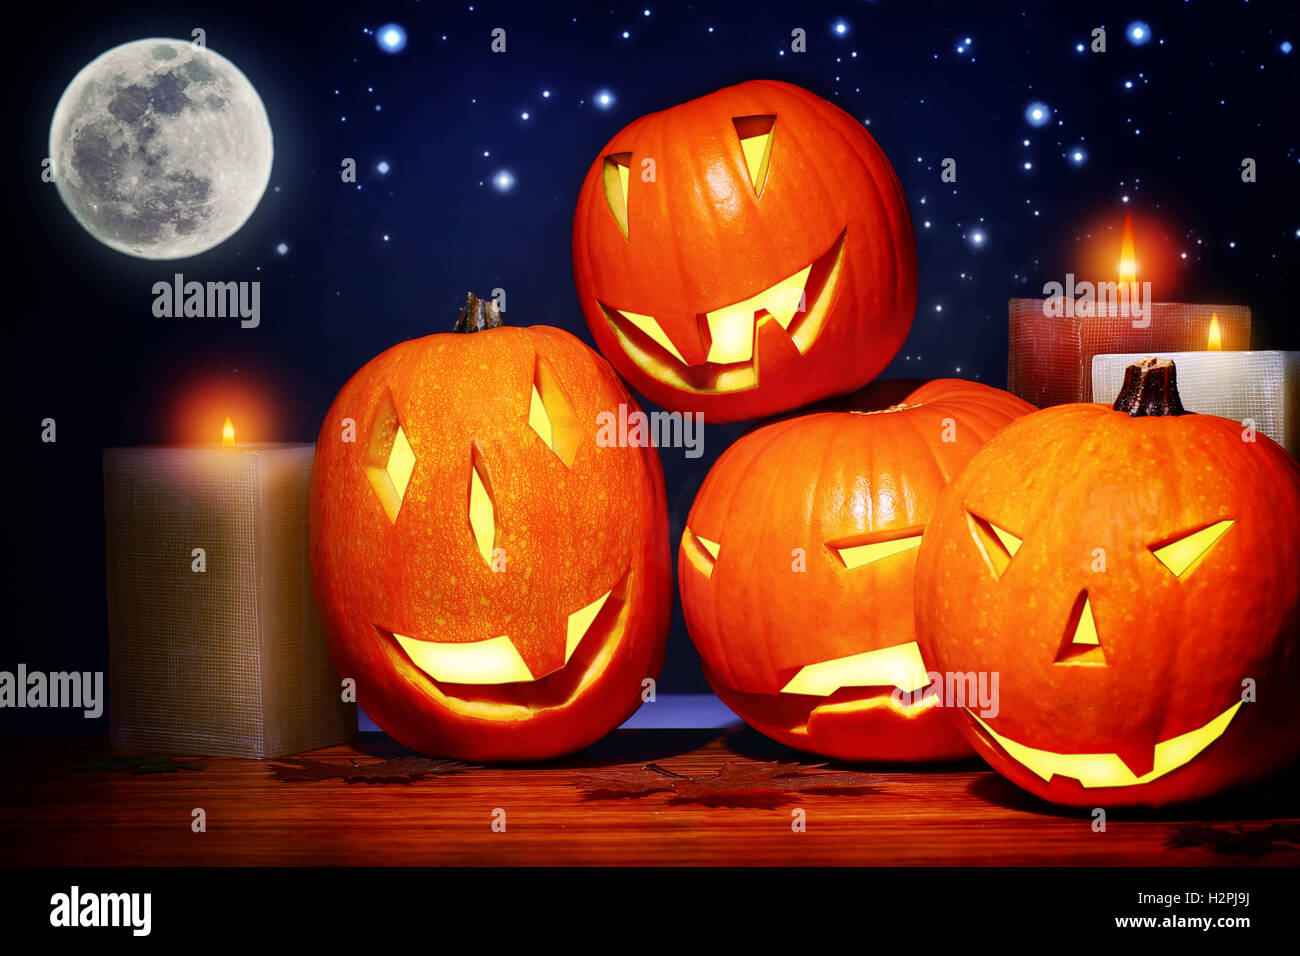 Halloween party decor, scary festive still life over starry sky background, carved pumpkin faces as jack-o-lantern Stock Photo